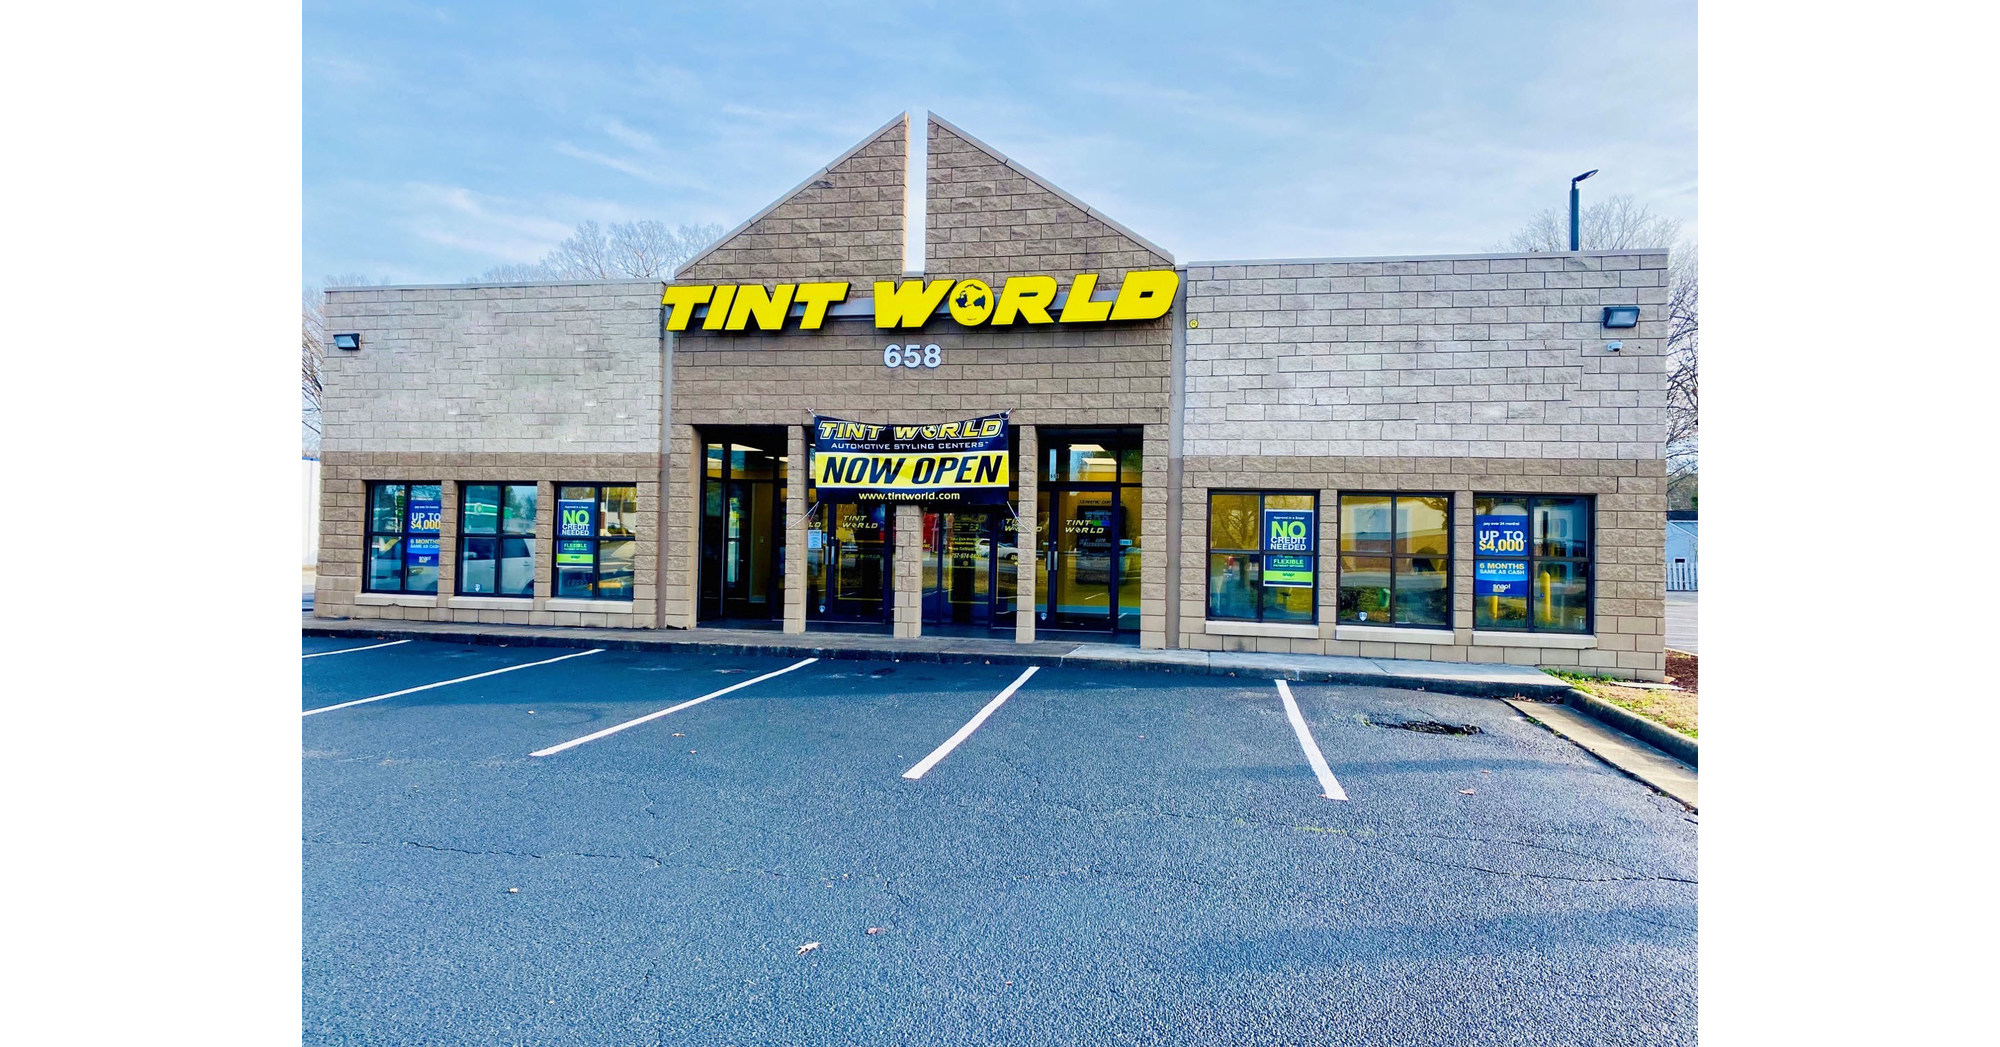 Tint World® expands to third location in Virginia